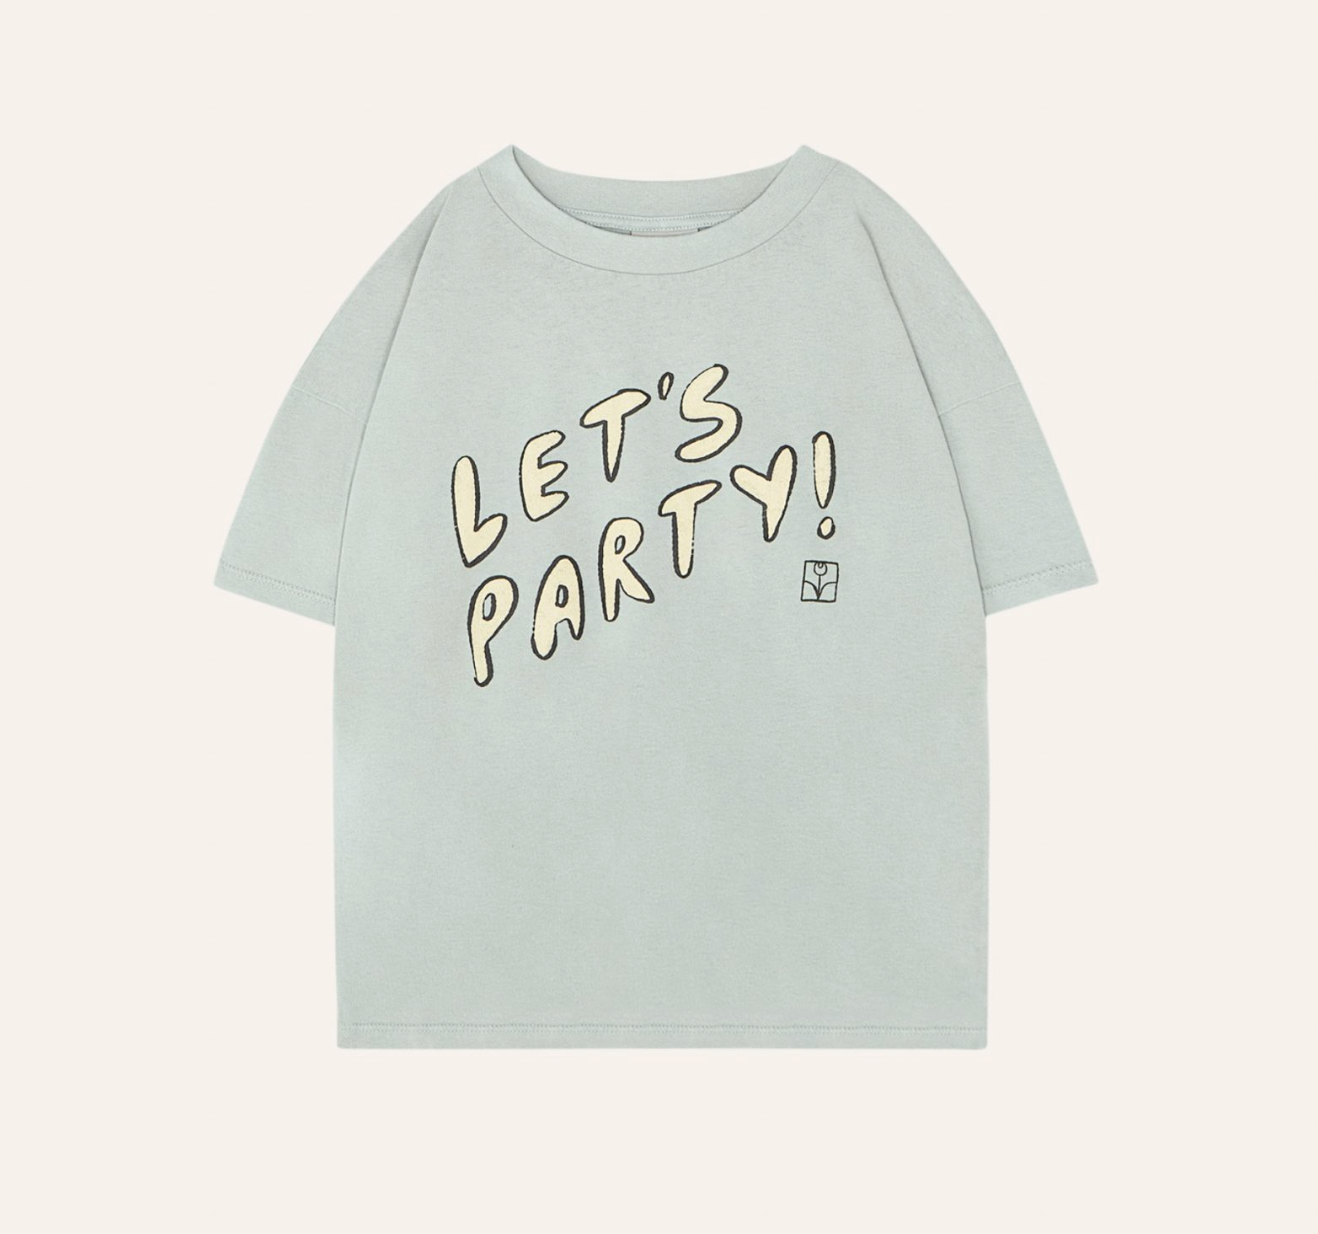 The Campamento - lets party oversized kids t-shirt